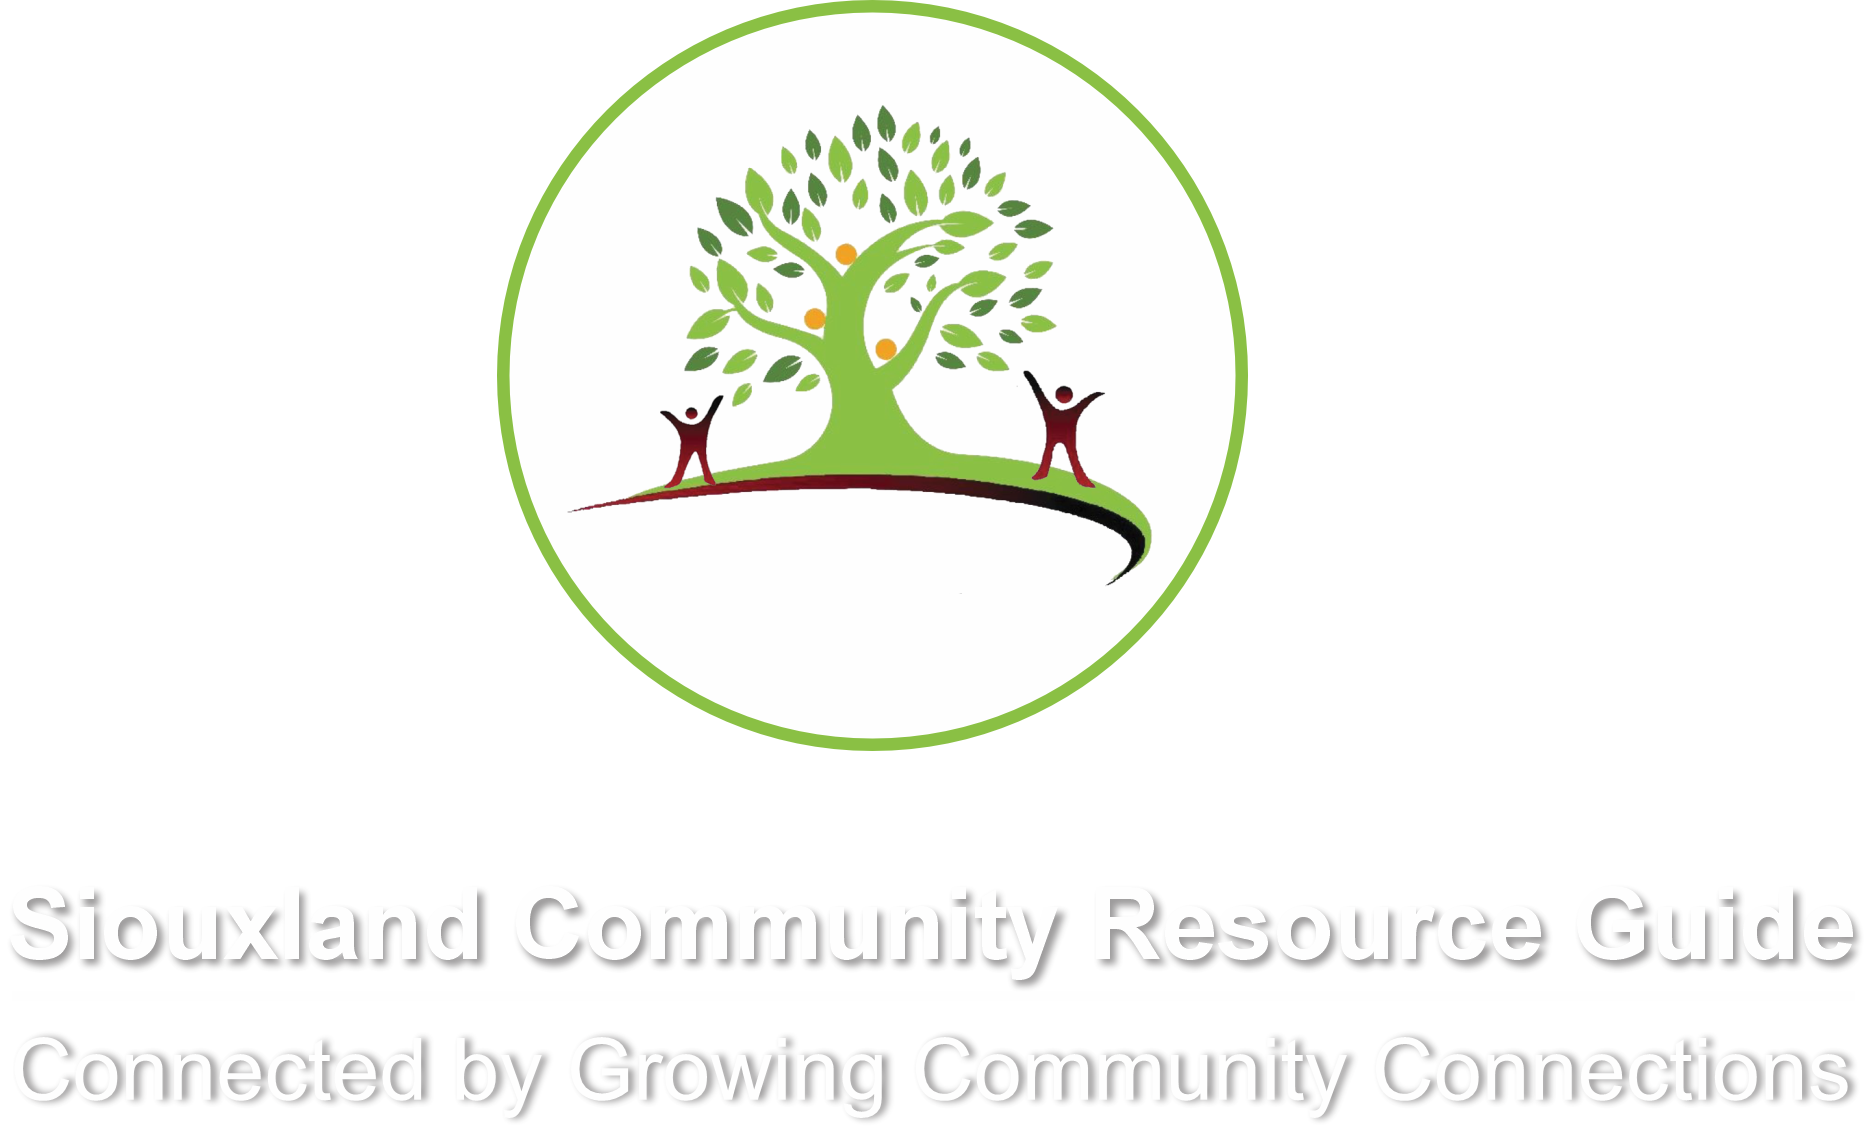 Growing Community Connections